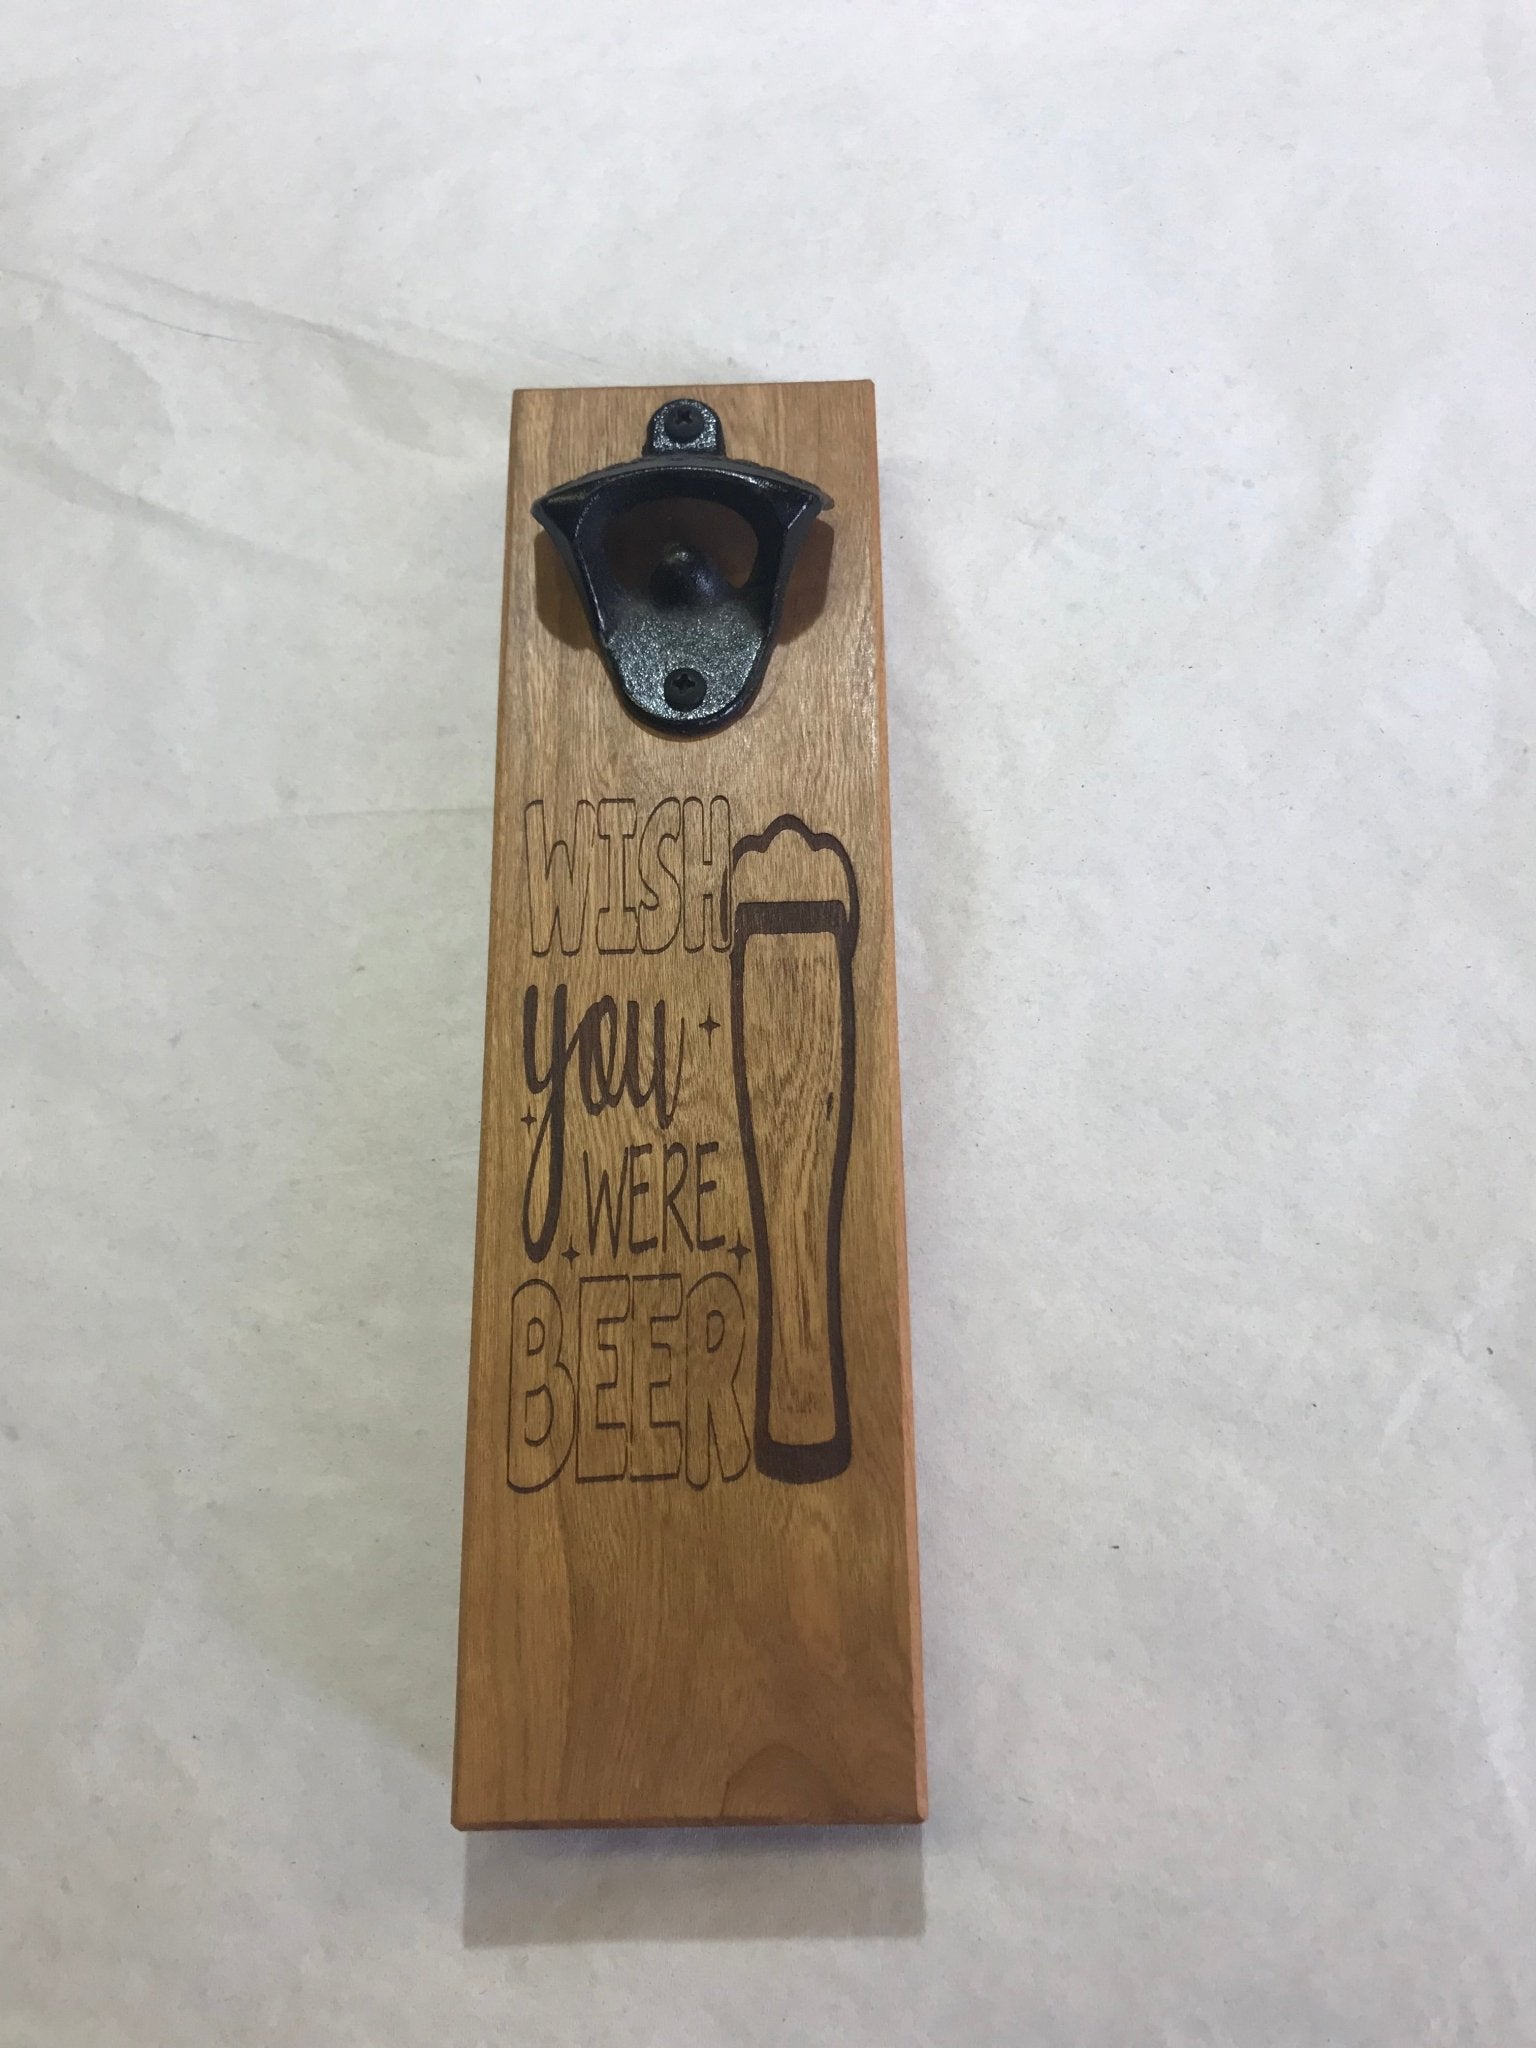 Magnetic Mount Bottle Opener - Wish You Were Beer - Cherry - Fenwick & OliverMagnetic Mount Bottle Opener - Wish You Were Beer - CherryFenwick & OliverFenwick & OliverMMB-WISH-CH-1